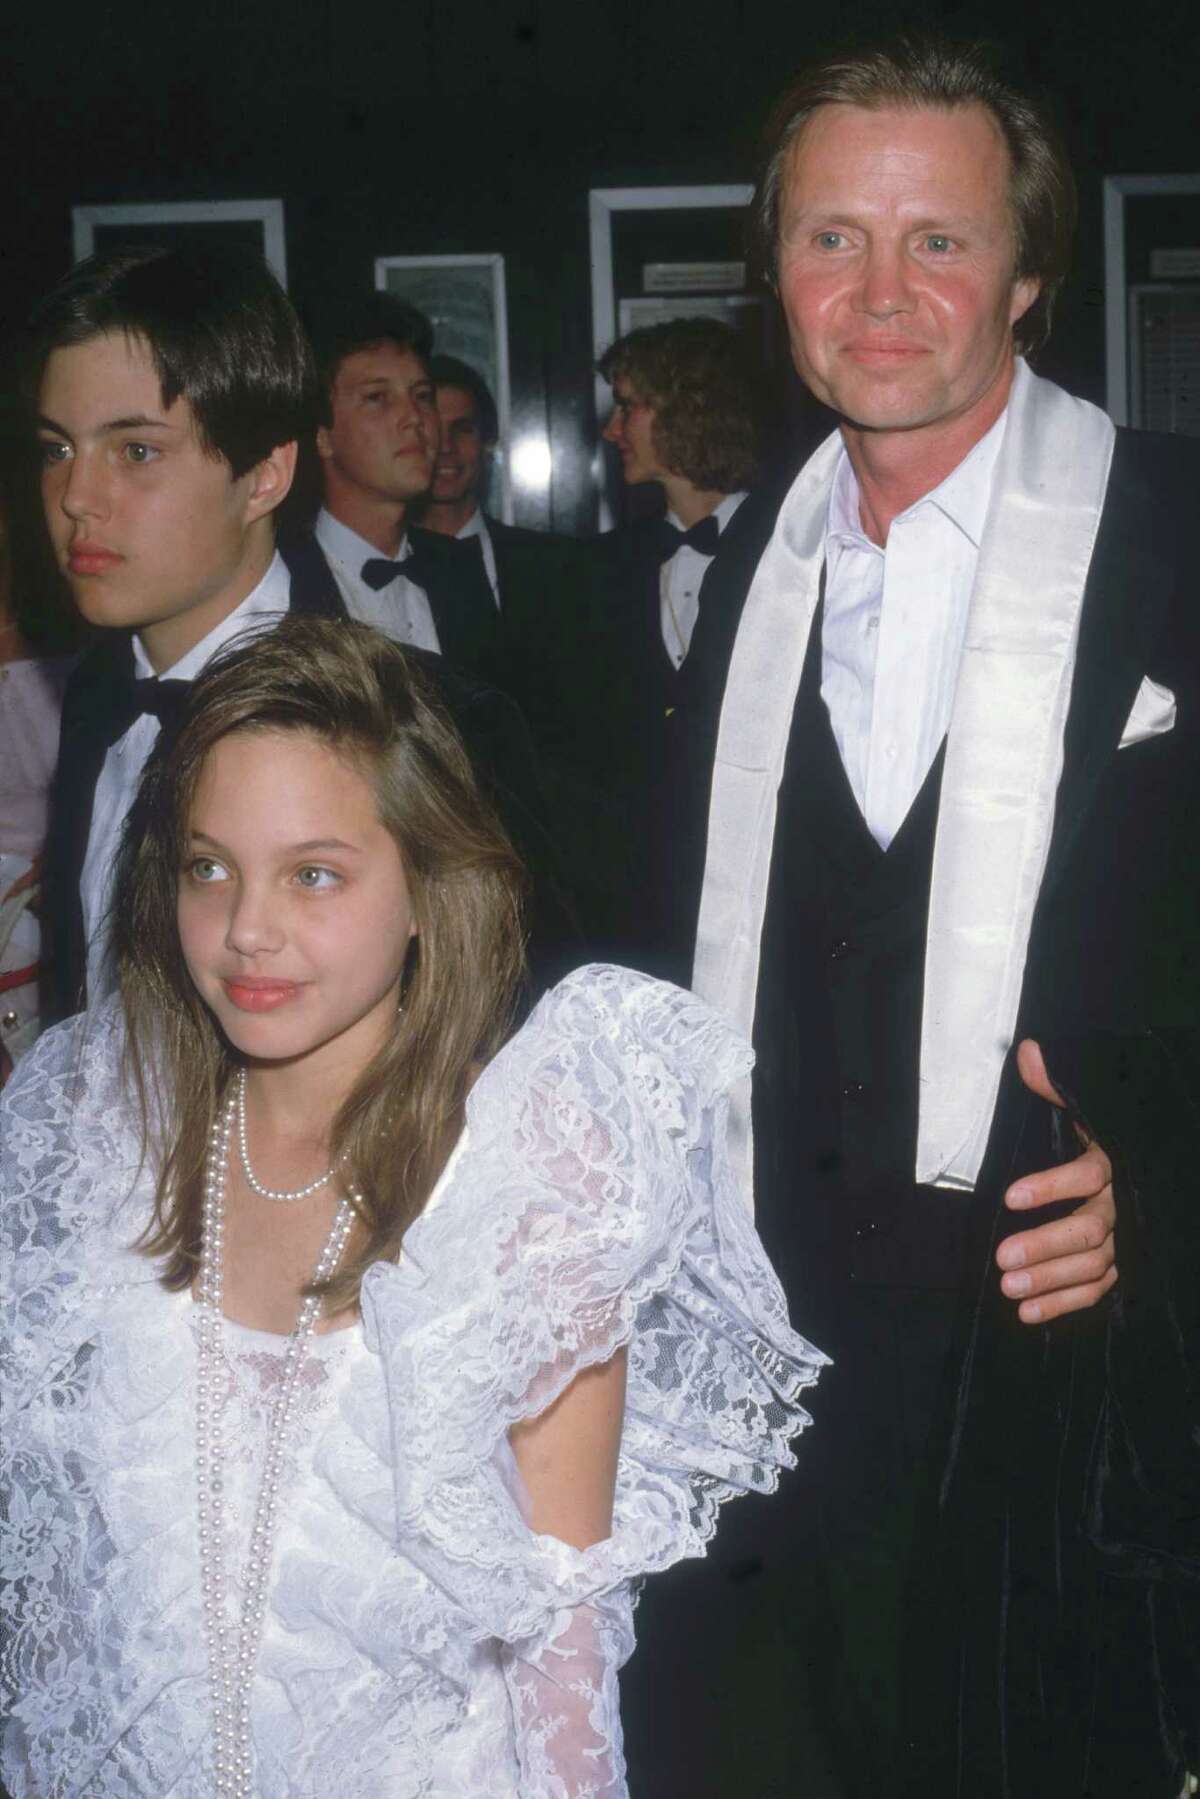 Jon Voight attends the Academy Awards with his son James Haven Voight (left) and daughter Angelina Jolie Voight, then 10 years old, in Los Angeles, March 24, 1986.